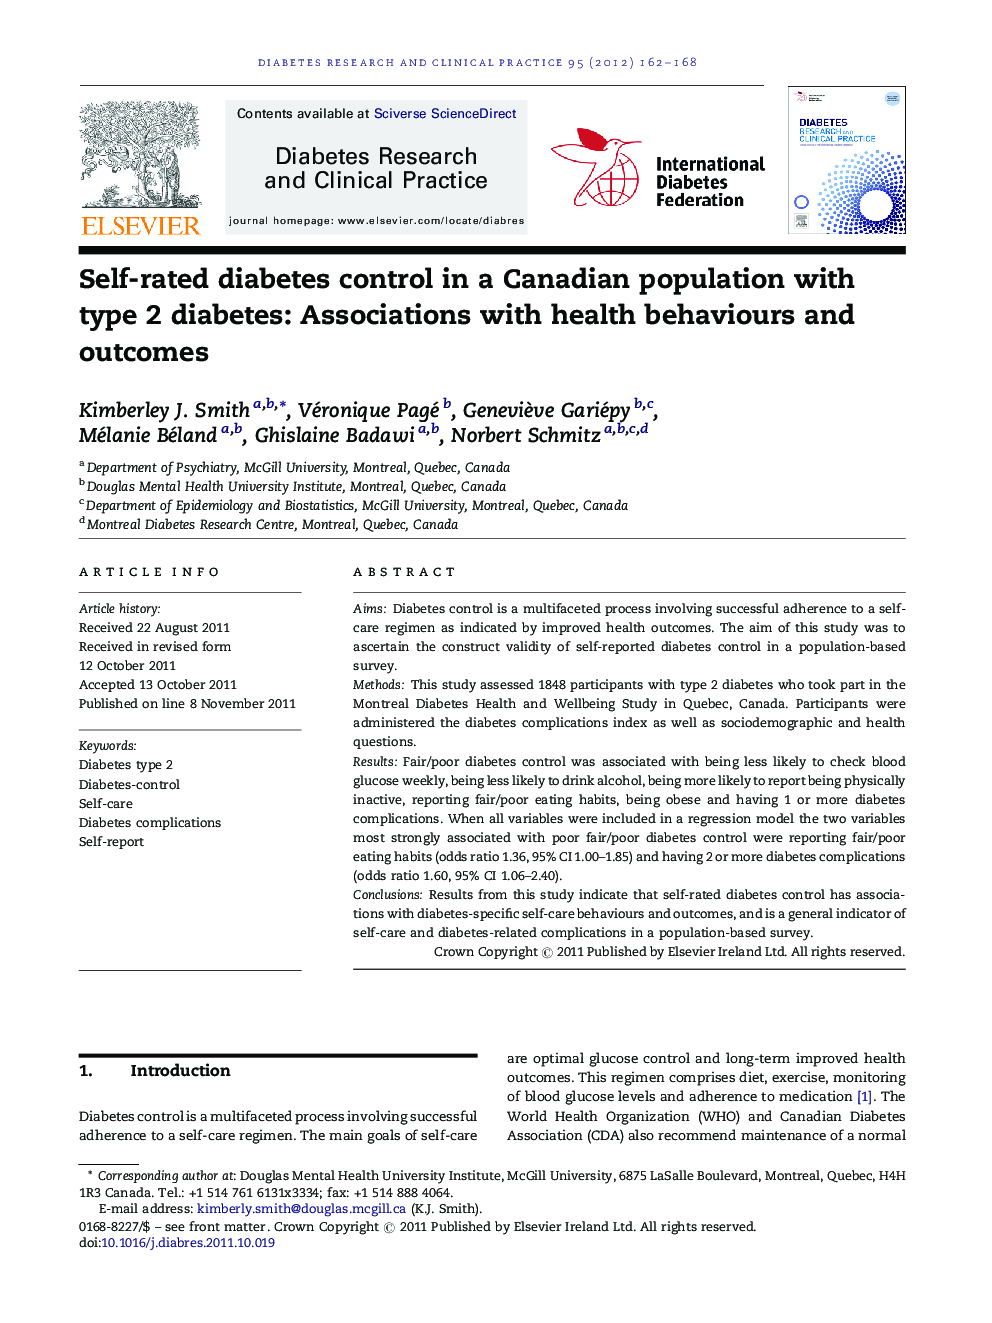 Self-rated diabetes control in a Canadian population with type 2 diabetes: Associations with health behaviours and outcomes